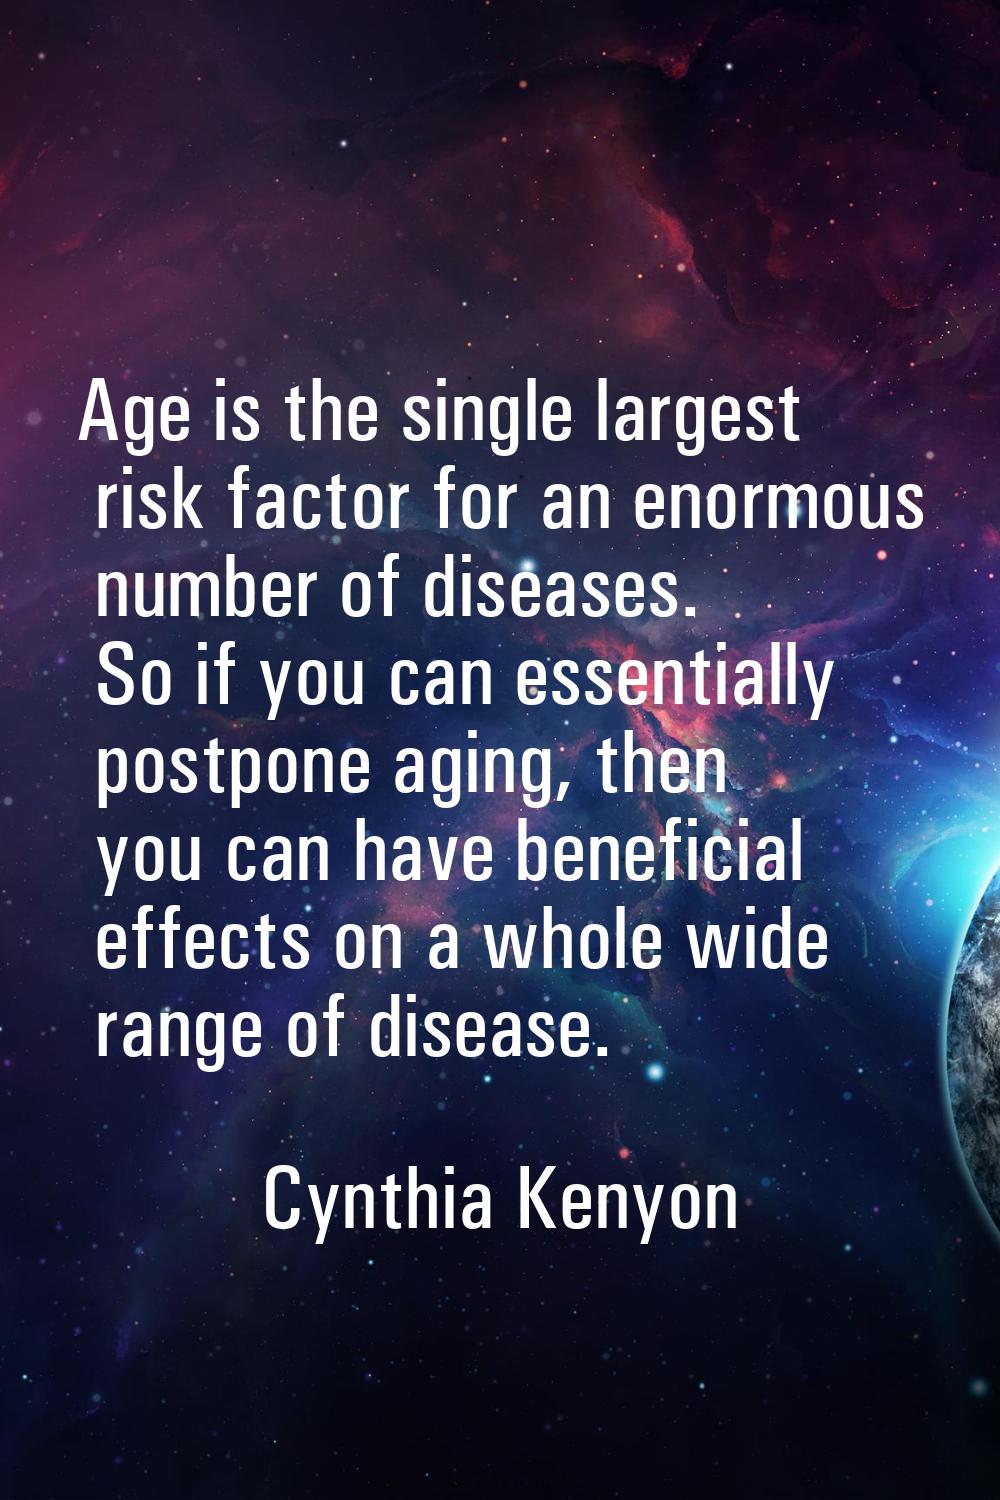 Age is the single largest risk factor for an enormous number of diseases. So if you can essentially